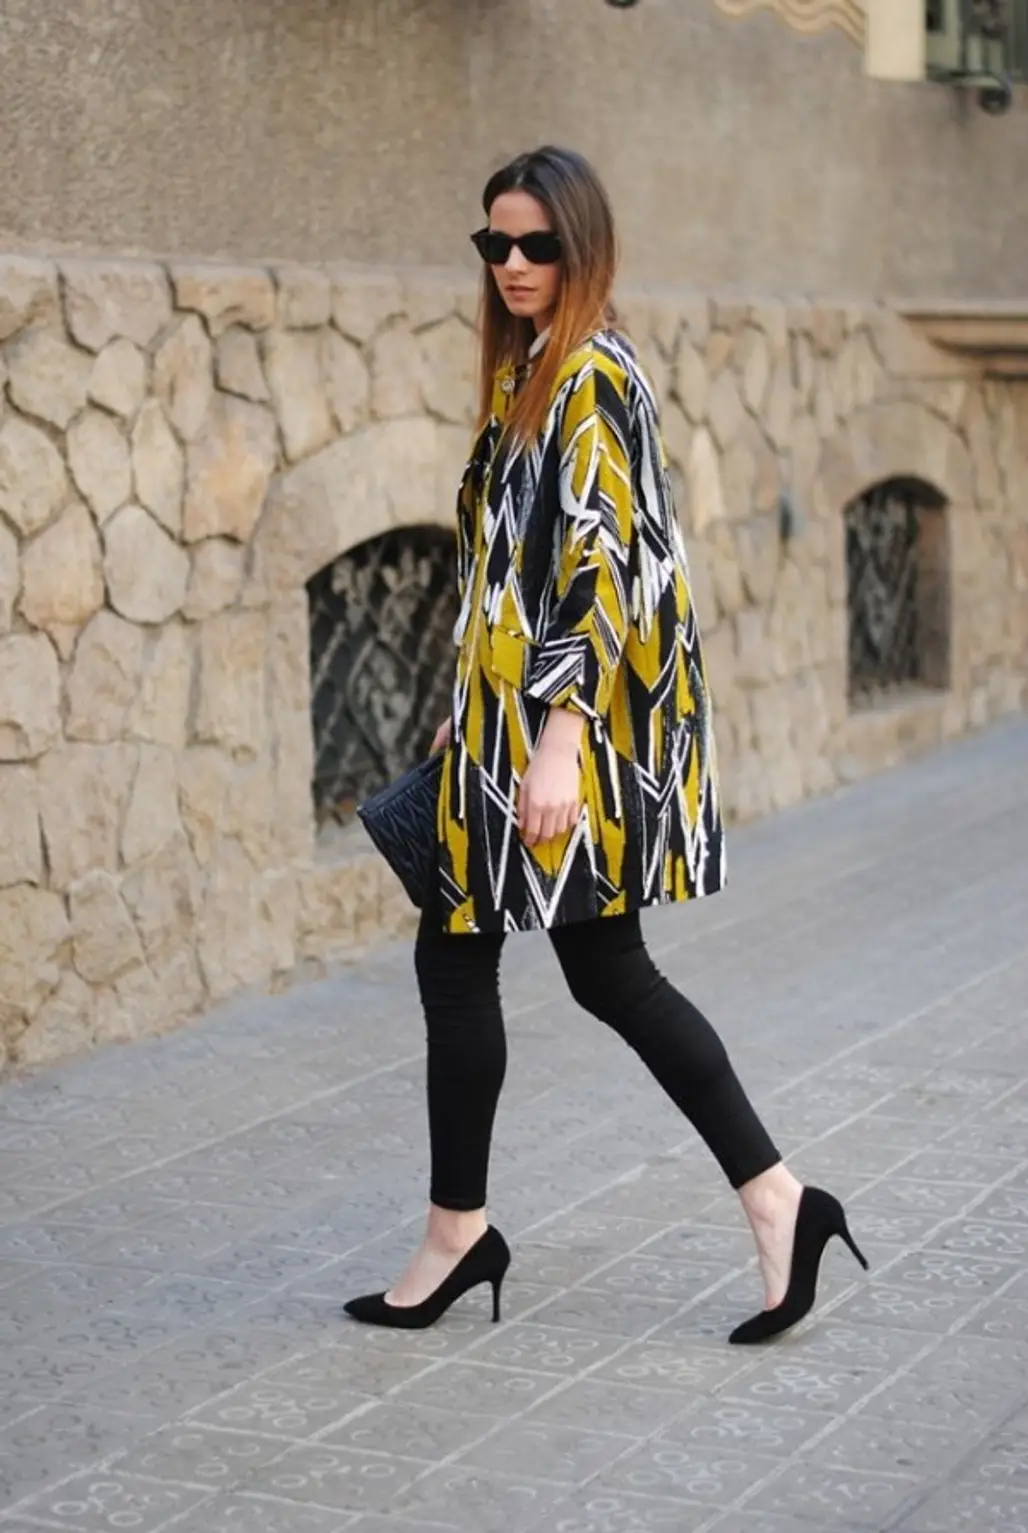 7 Fashion Dos and Don'ts if You Have Short Legs